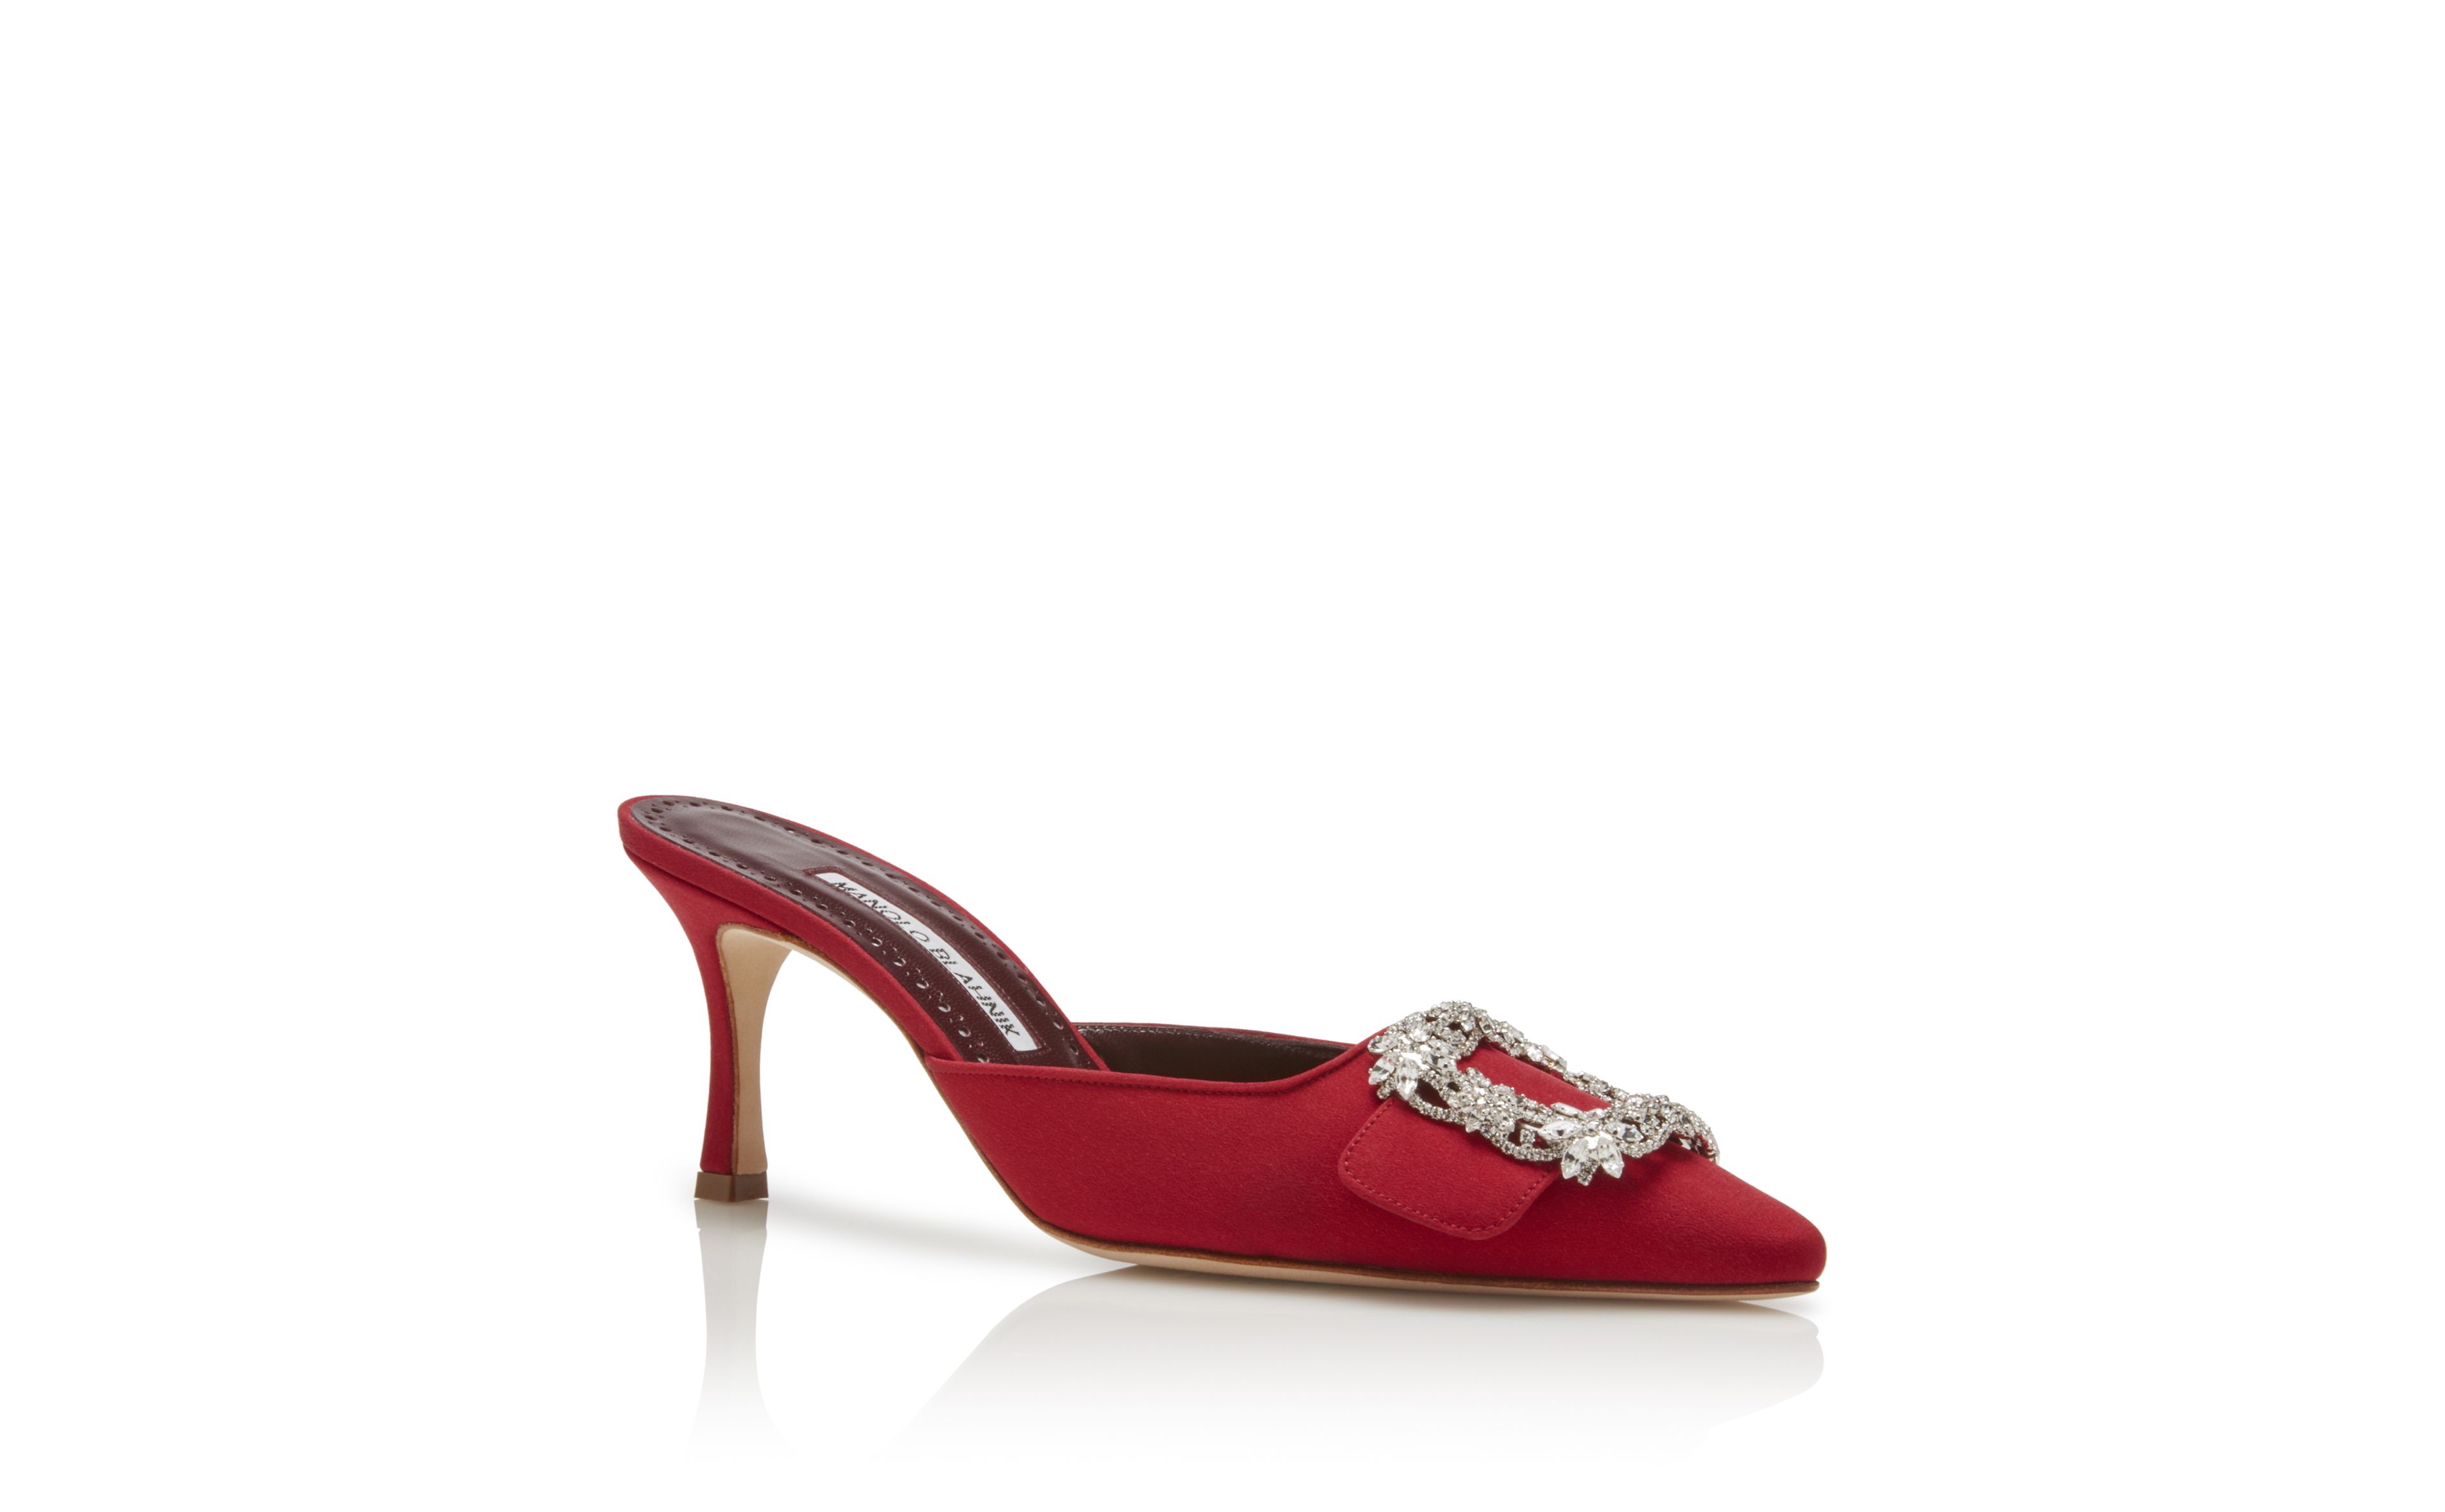 MAYSALE JEWEL | Red Crepe de Chine Jewel Buckled Mules | Manolo 